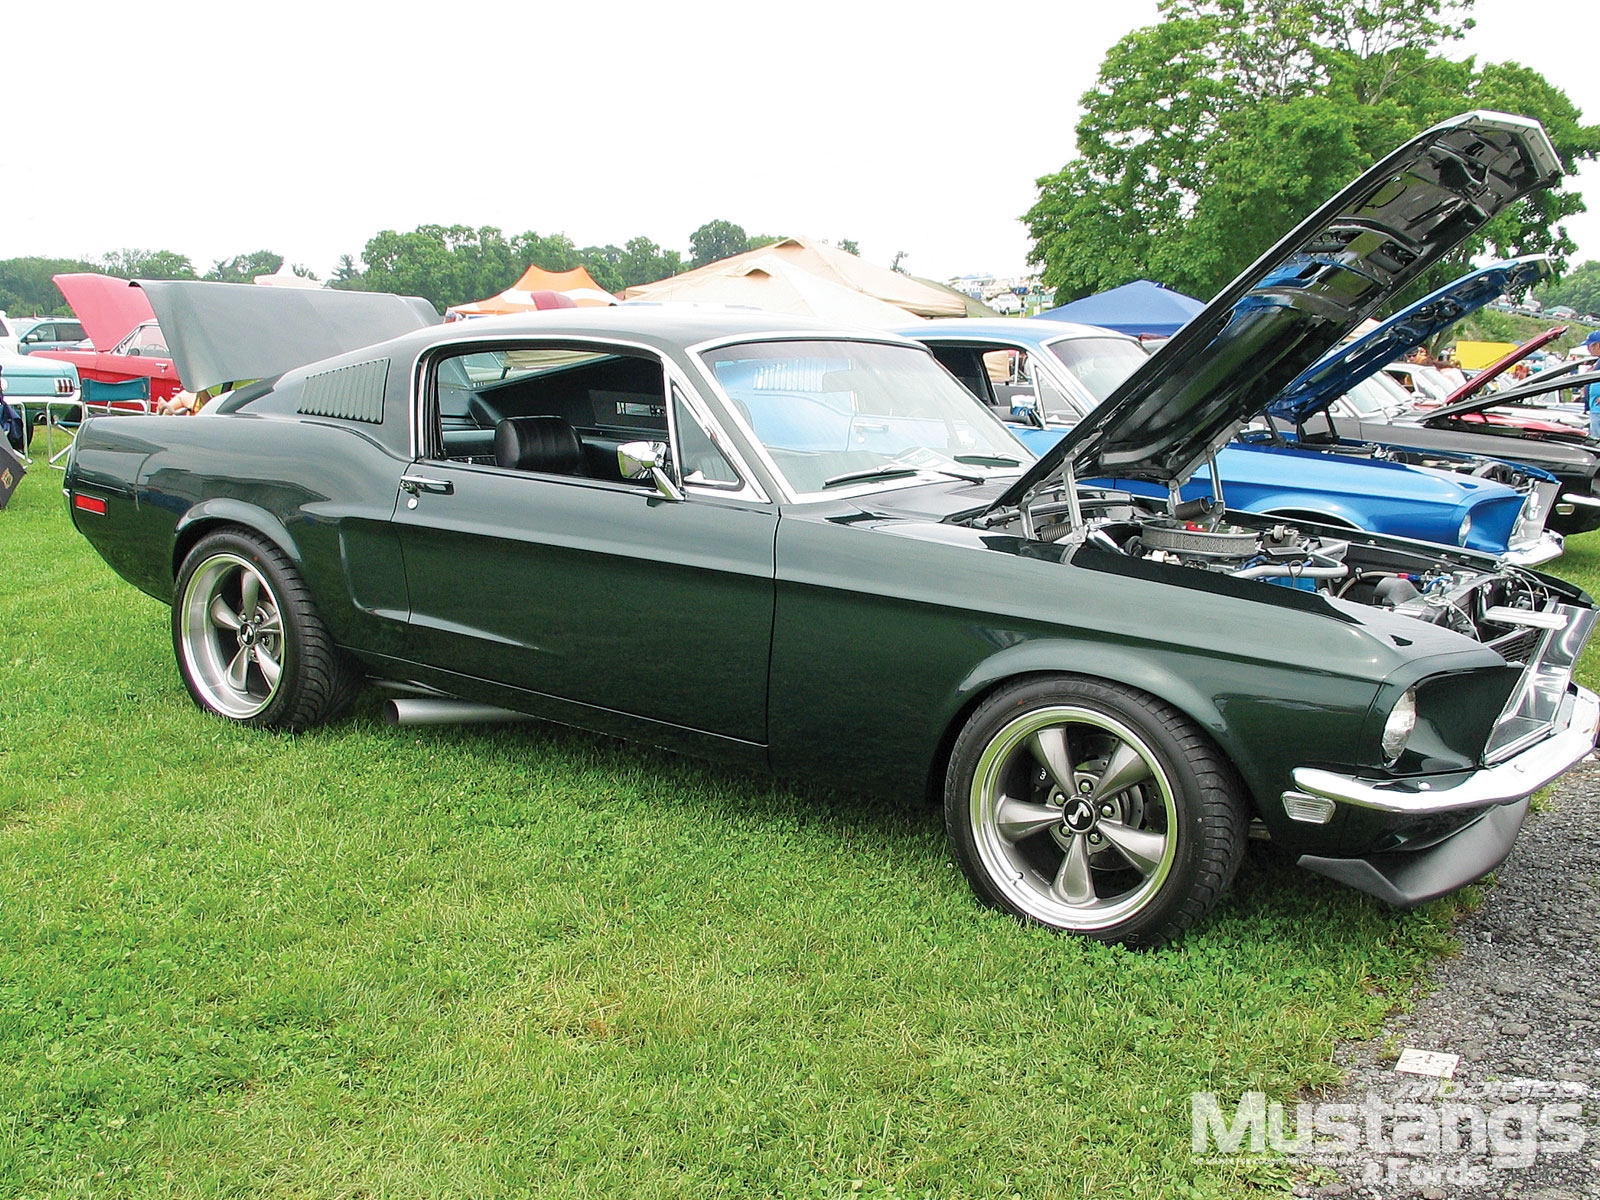 Ford Mustang Fastback 22